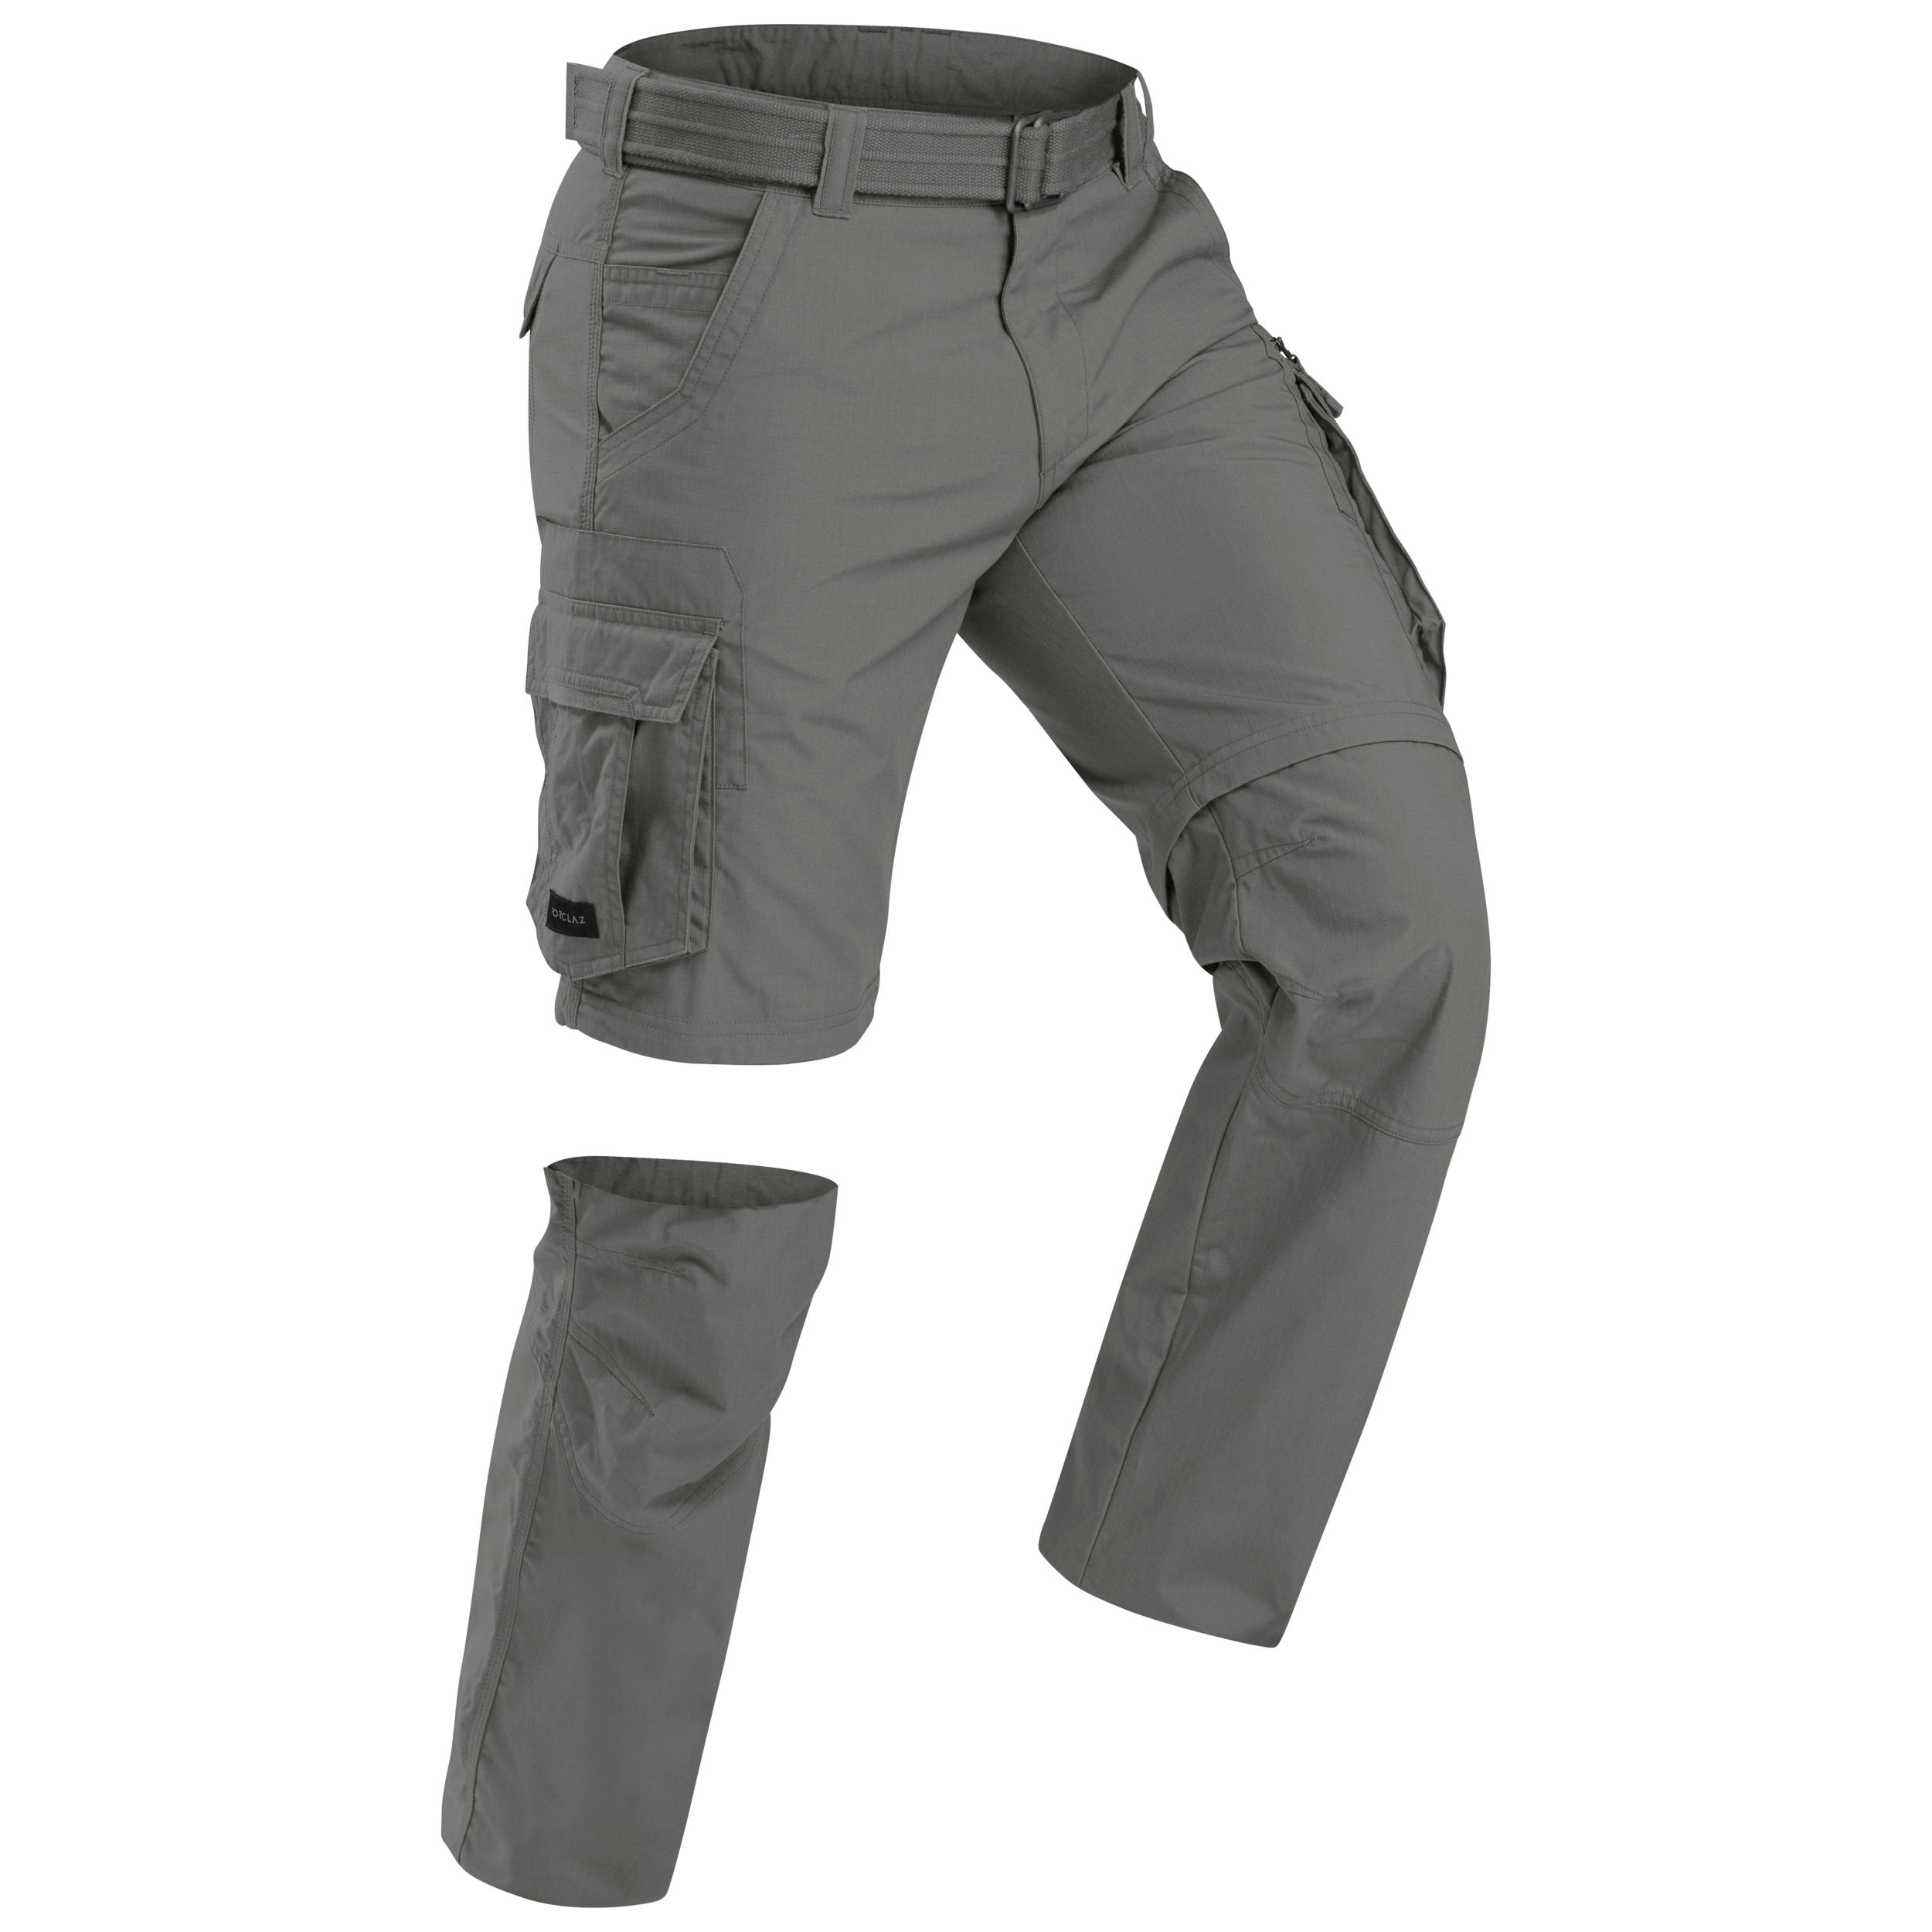 Men's travel trousers & pants | On India